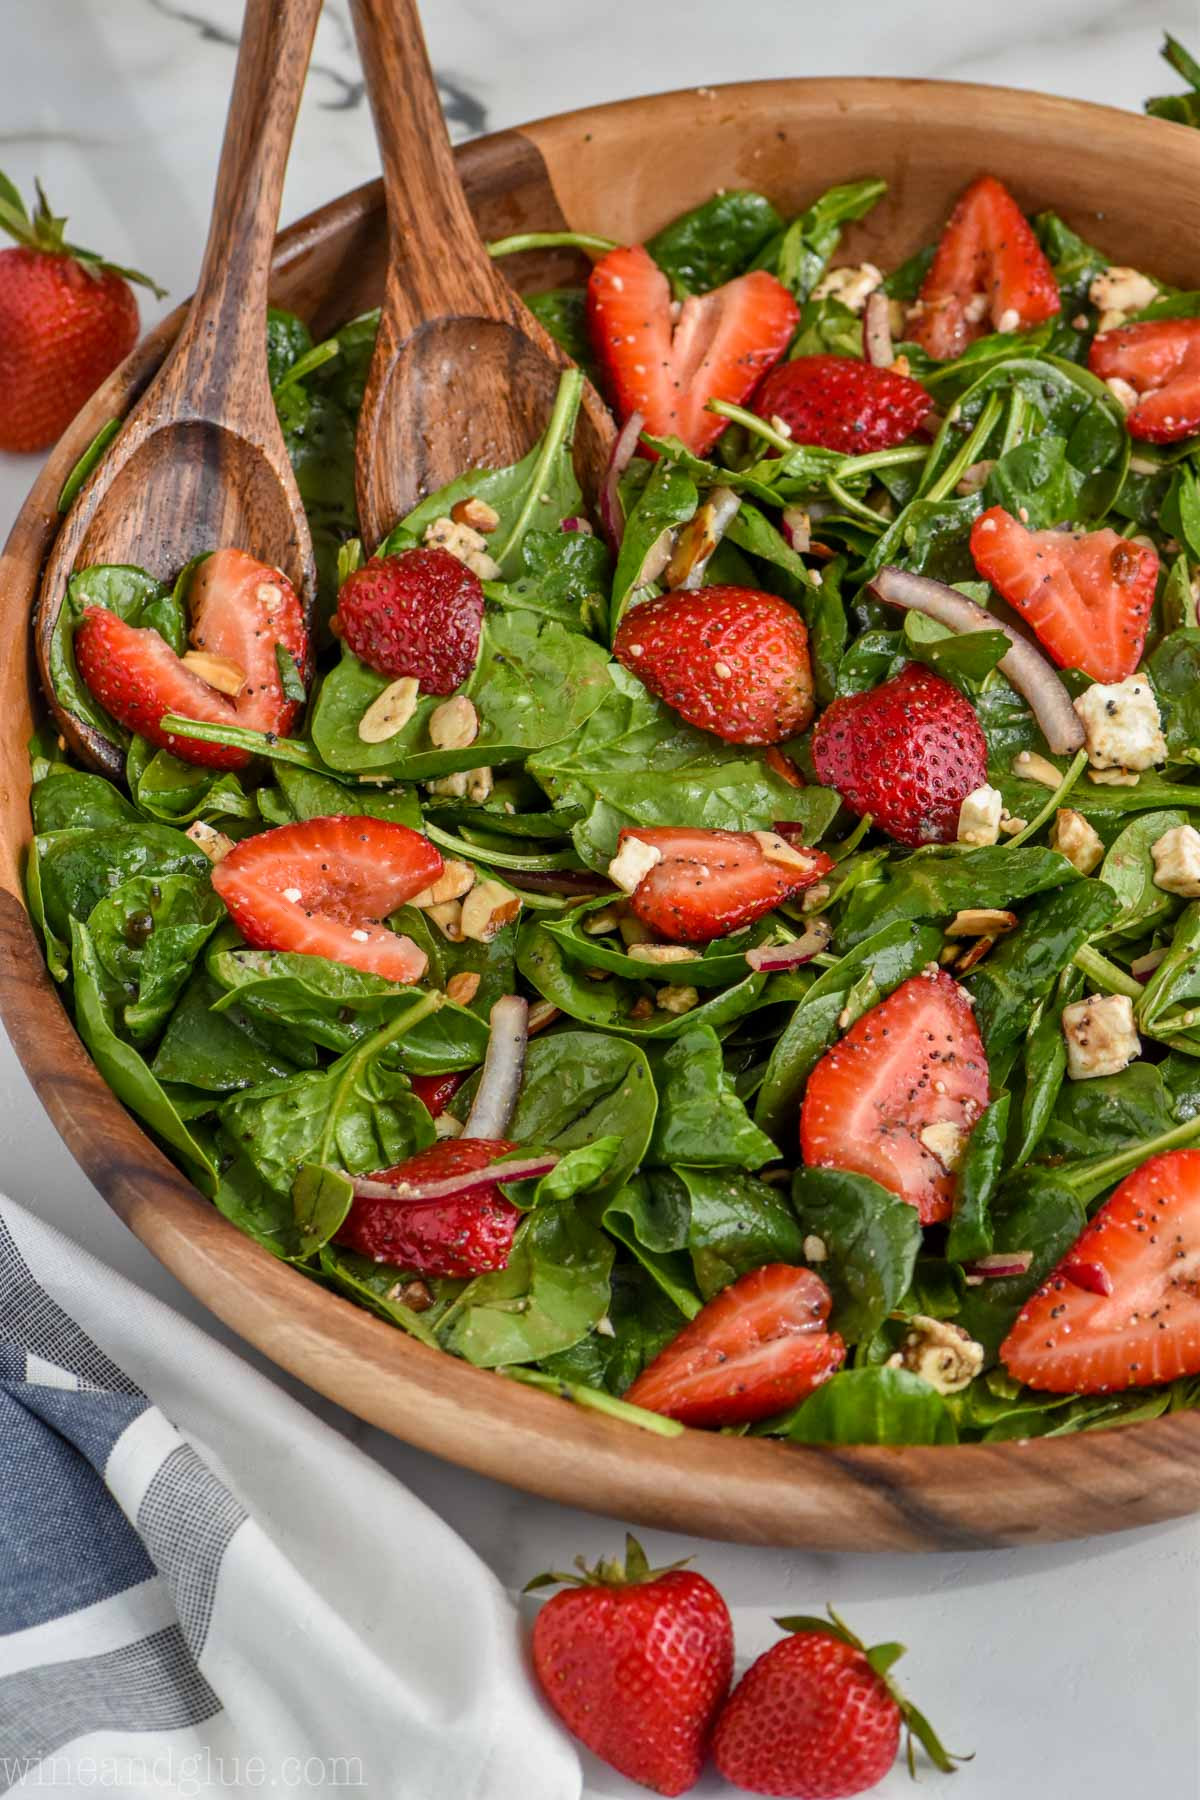 Spinach Salad Dressings Recipes
 The Best Strawberry Spinach Salad